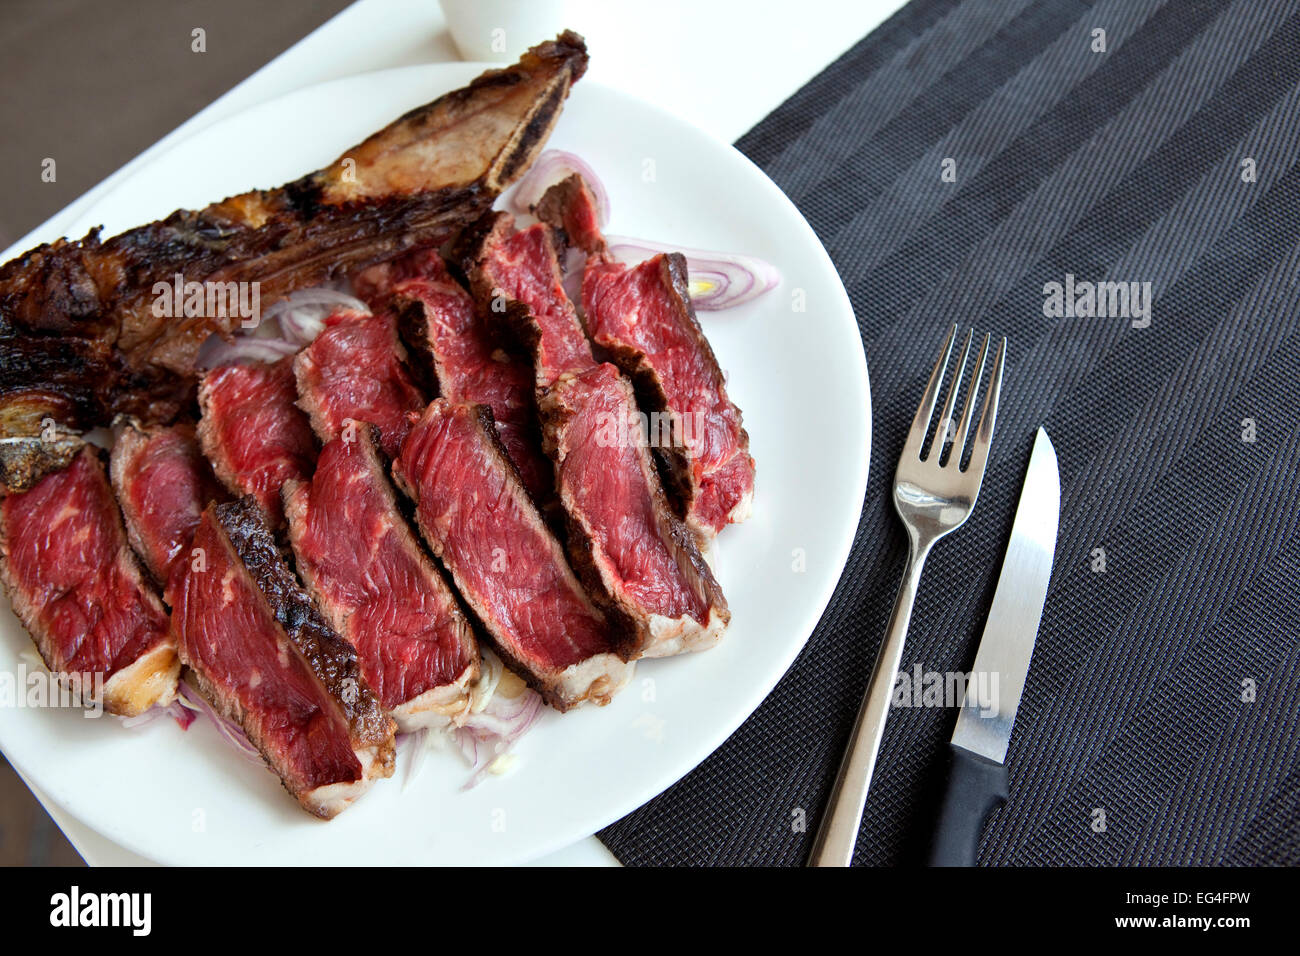 Prime rib on a plate Stock Photo